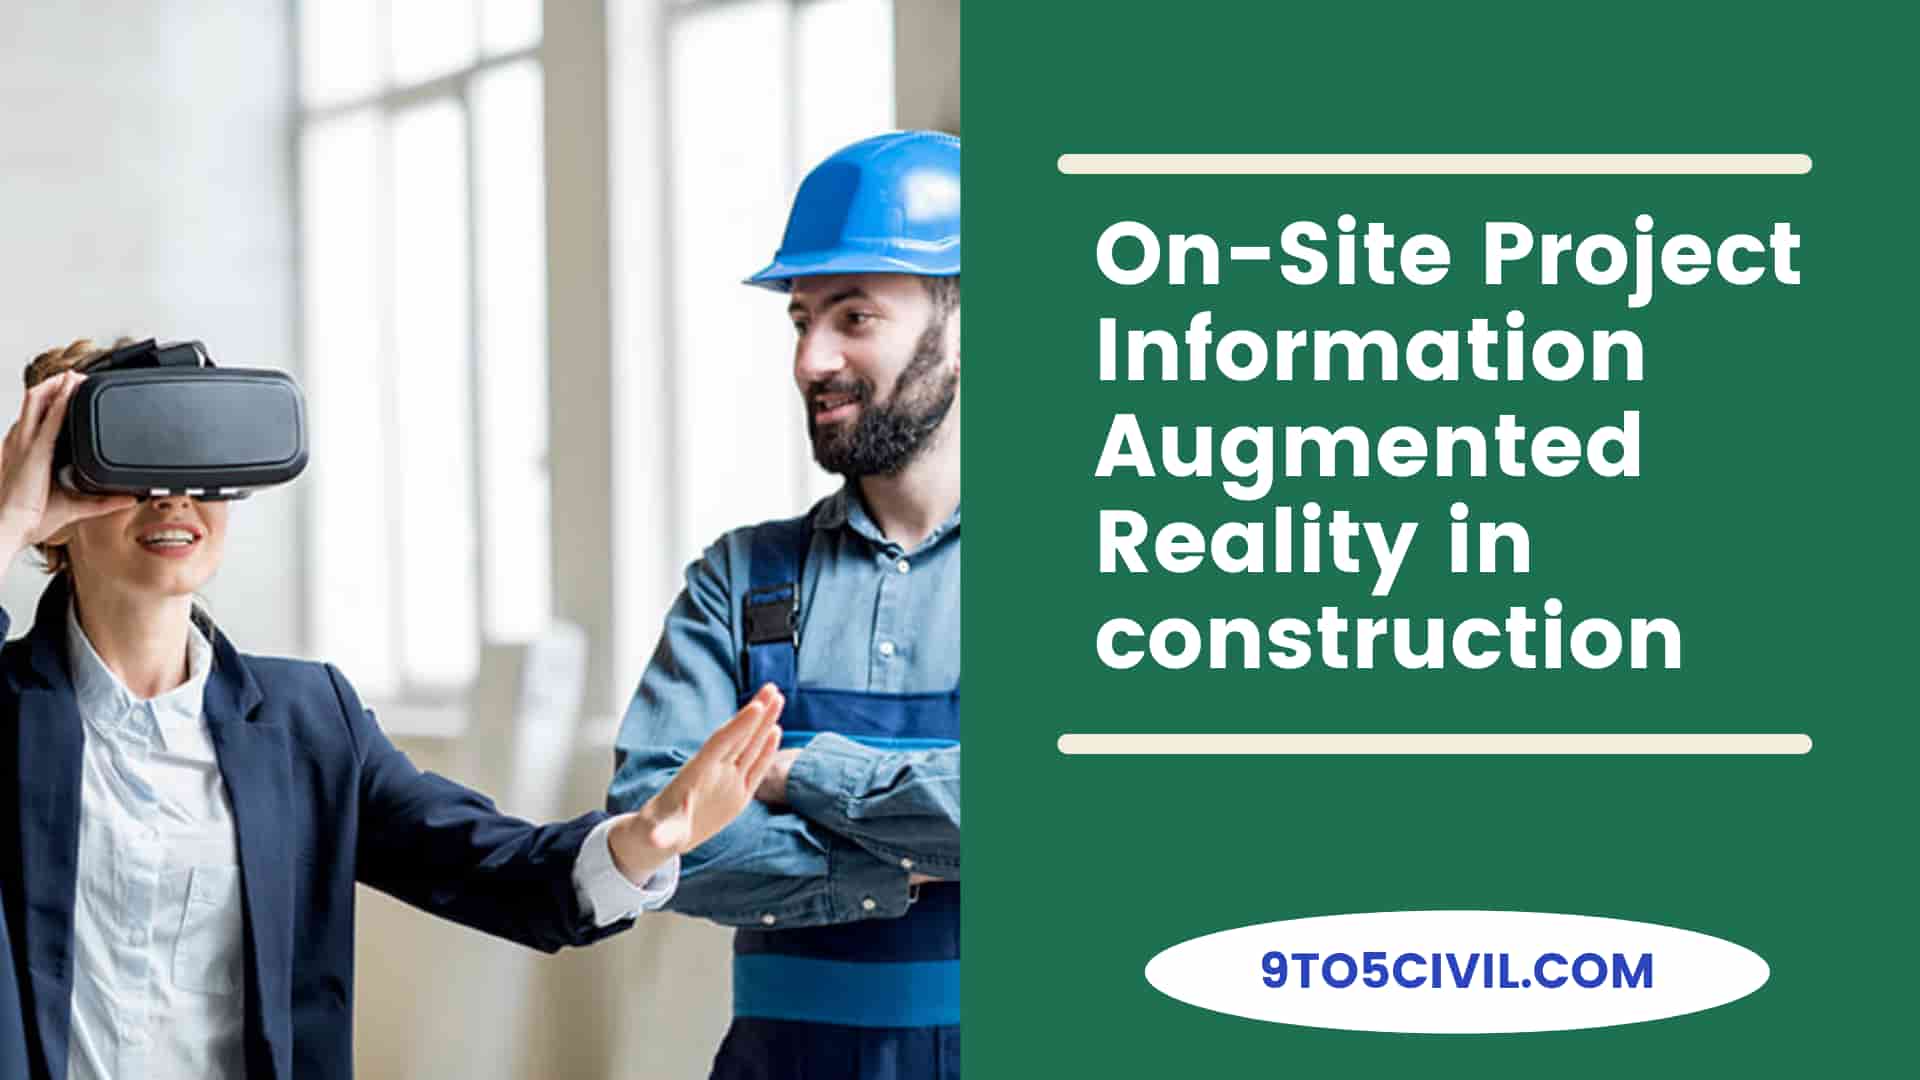 On-Site Project Information Augmented Reality in construction